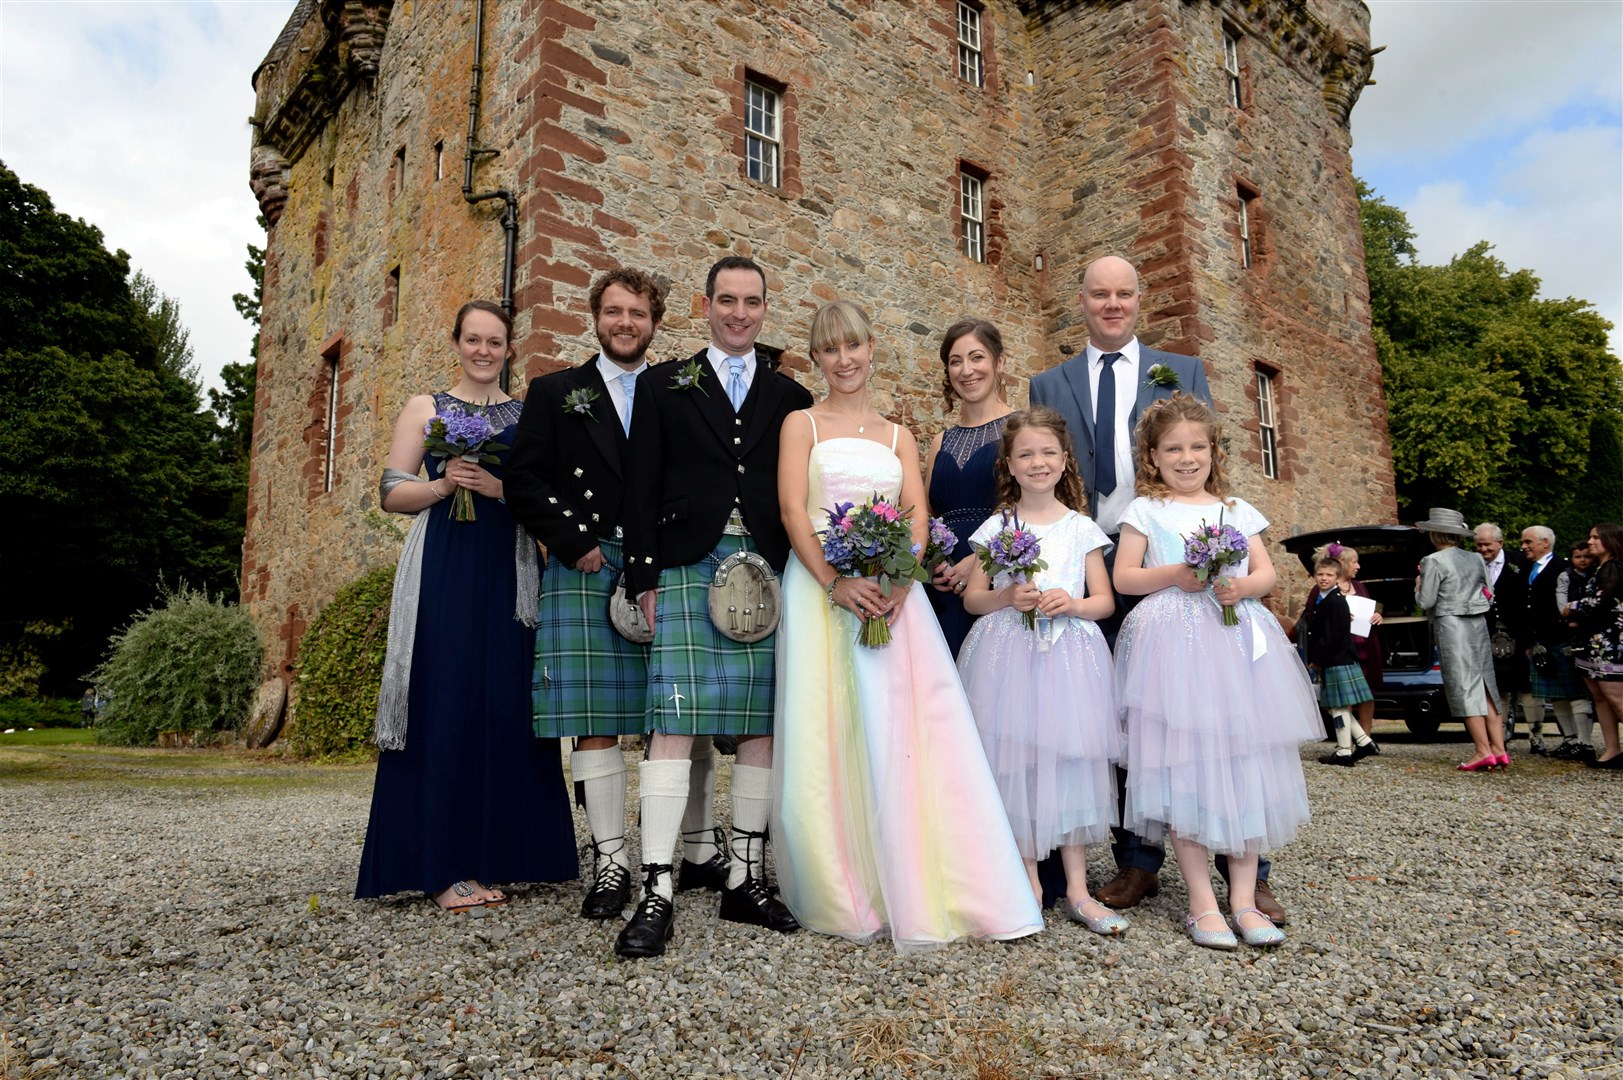 Ashley Traill (nee MacLennan) and groom Neil with (from left) bridesmaid Sophie Bryan, best man Neil Traill, bridesmaid Xanthe MacLeod, Simon MacLeod, and flower girls Hailey and Emily MacLeod. Picture: James Mackenzie